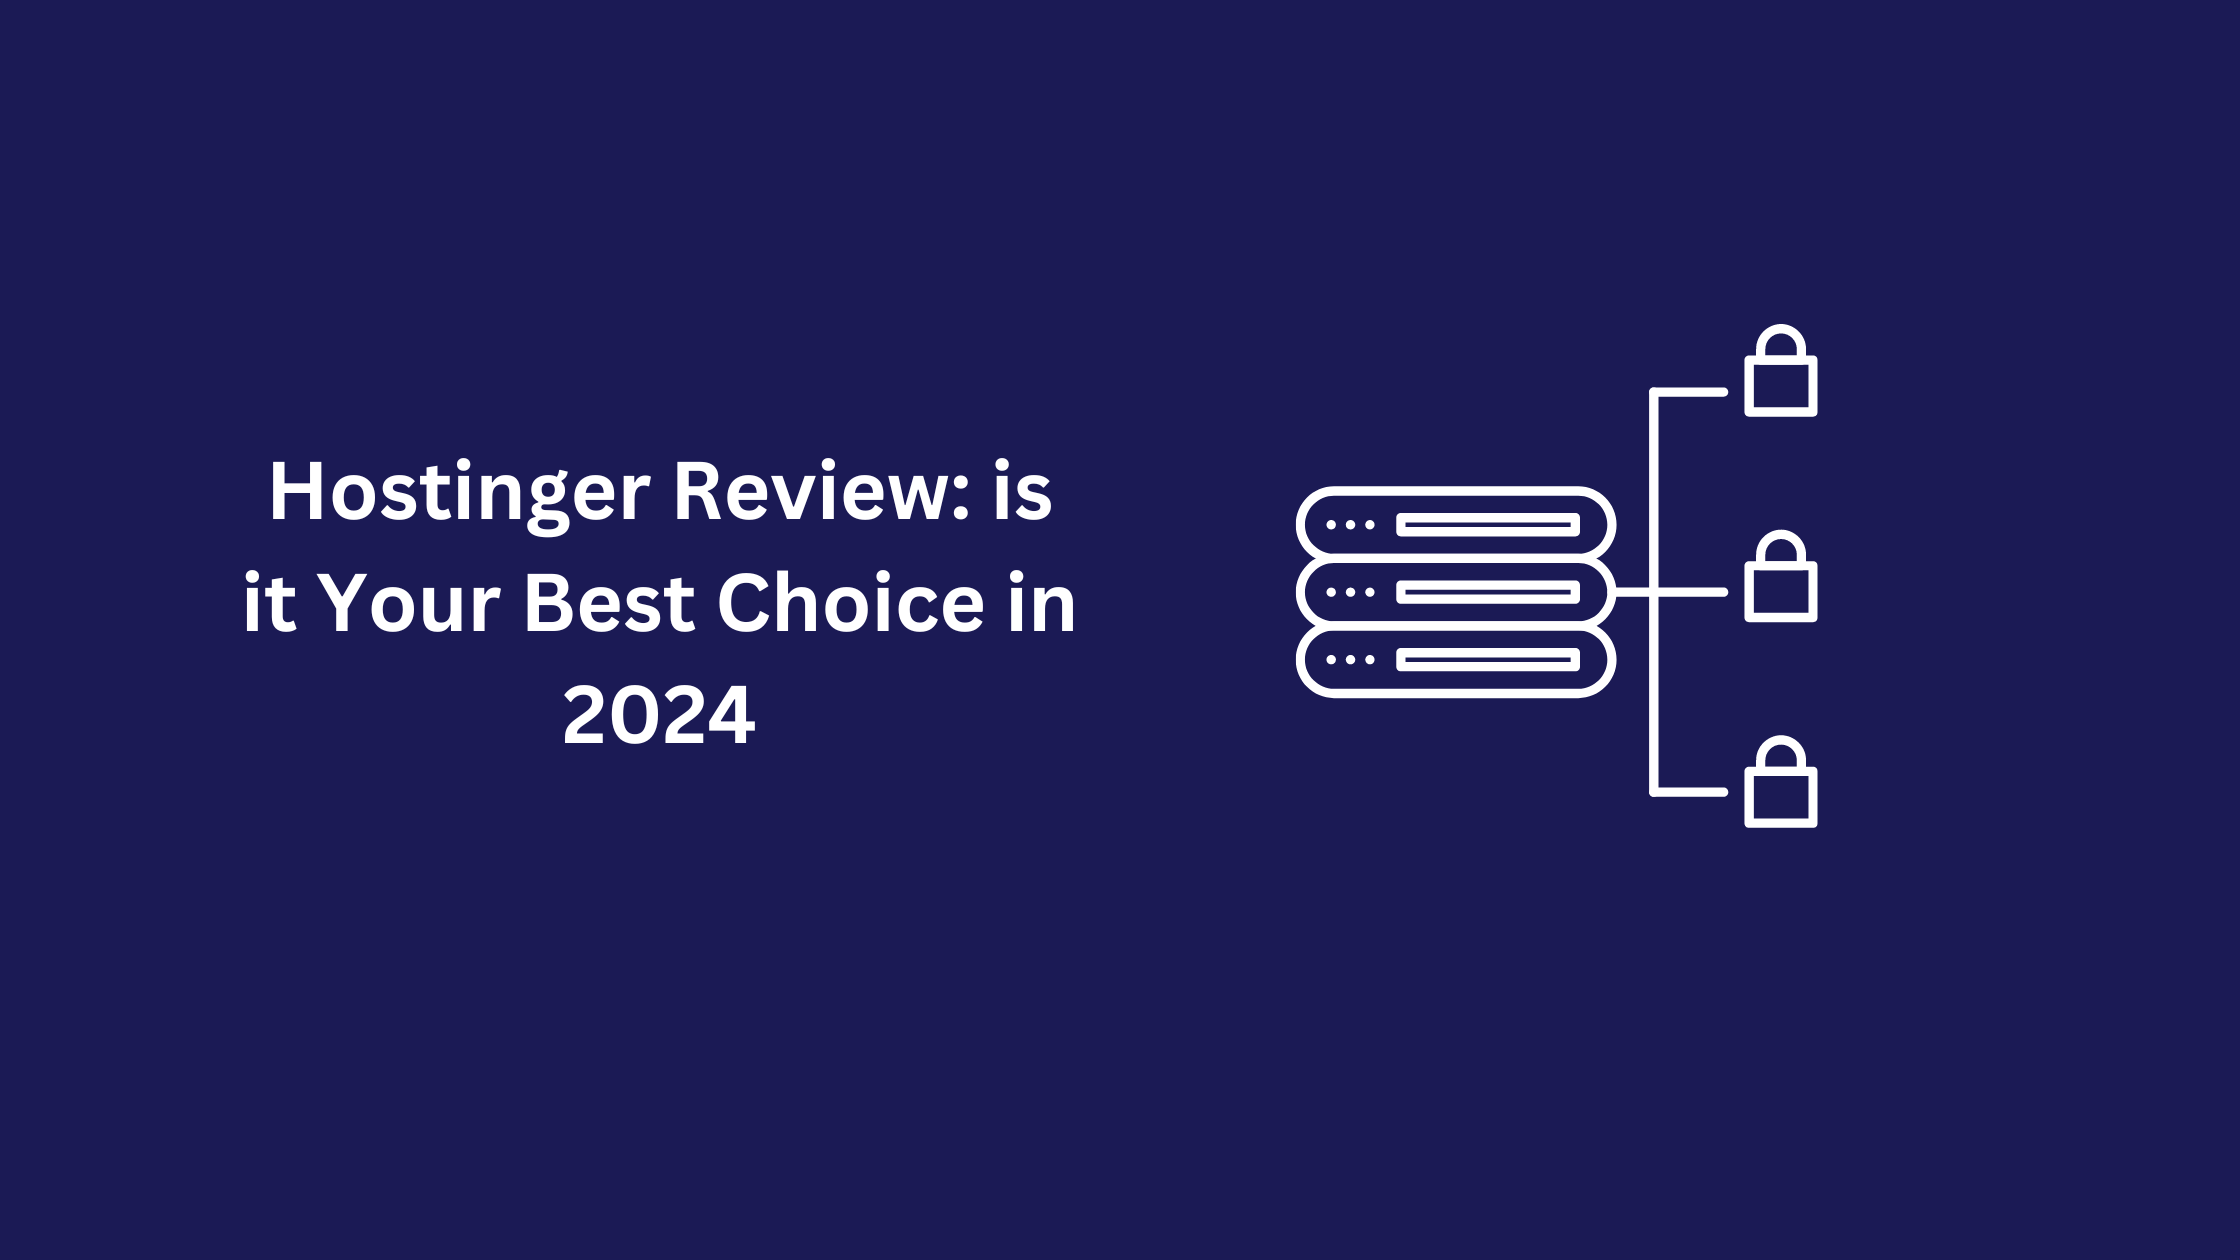 Hostinger Review: is it Your Best Choice in 2024